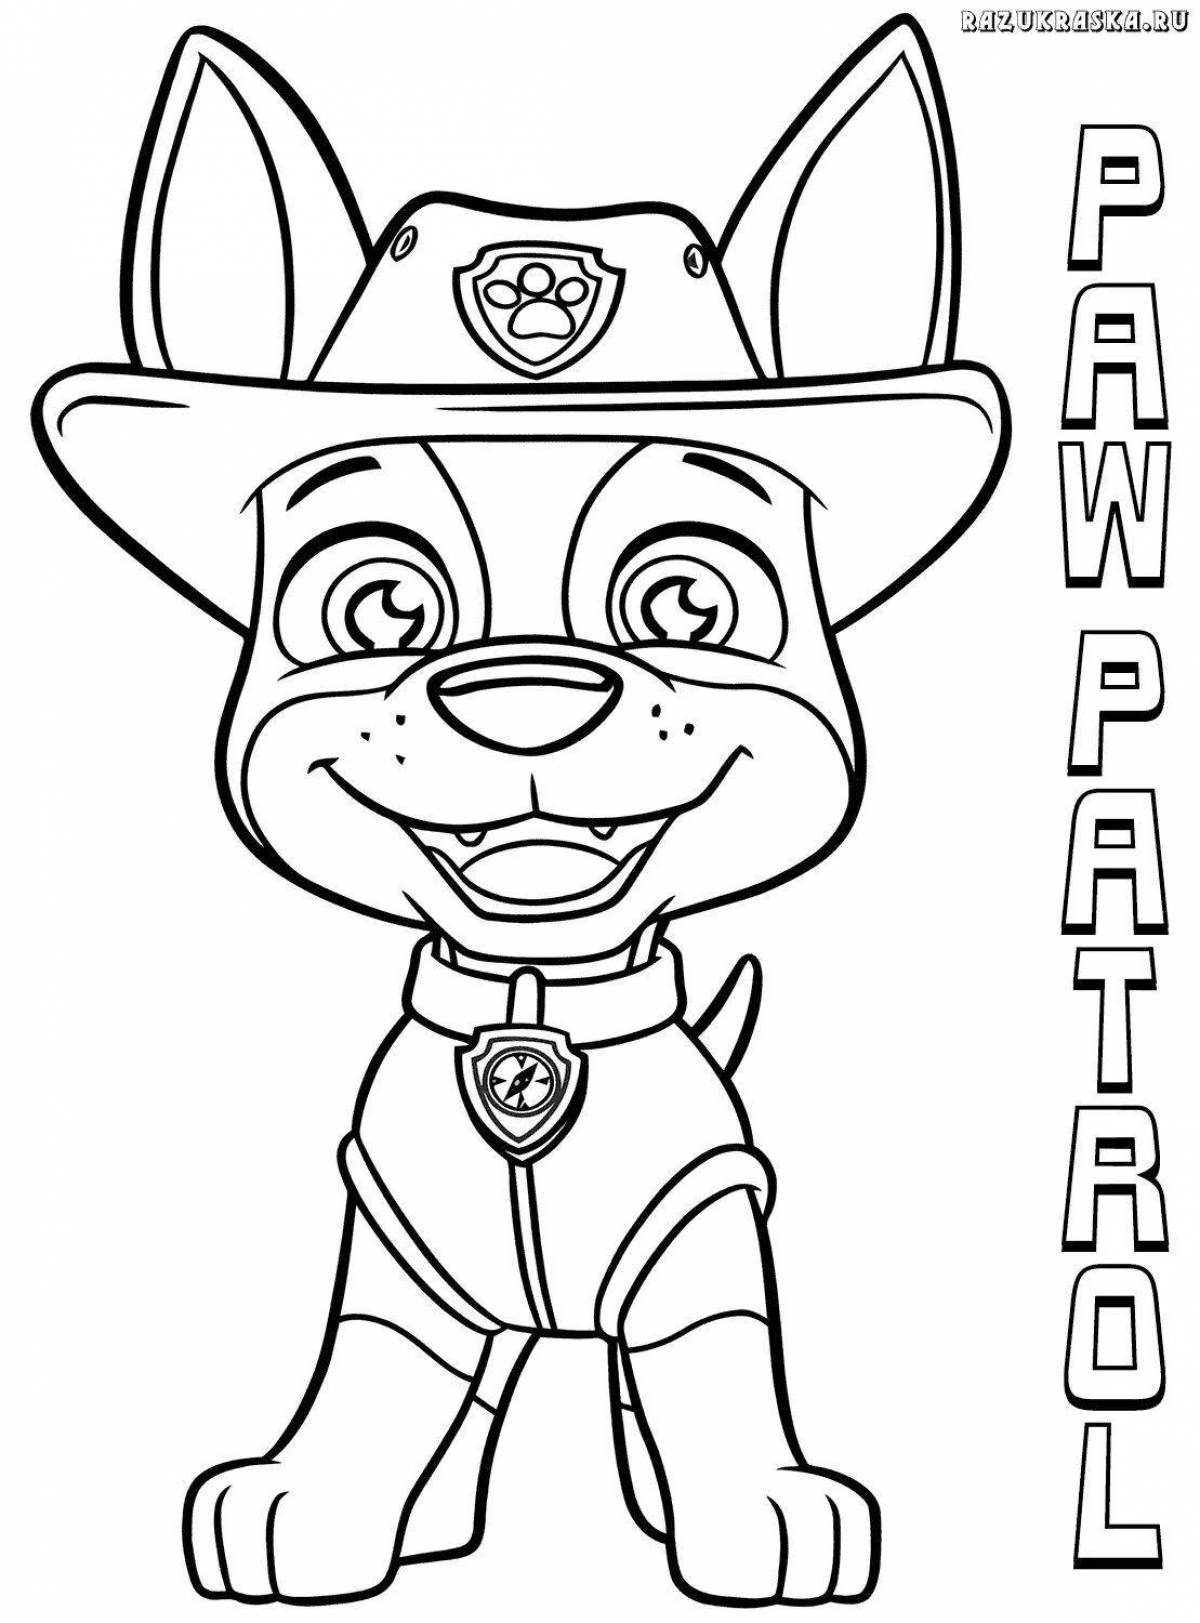 Fearless superhero dog coloring page